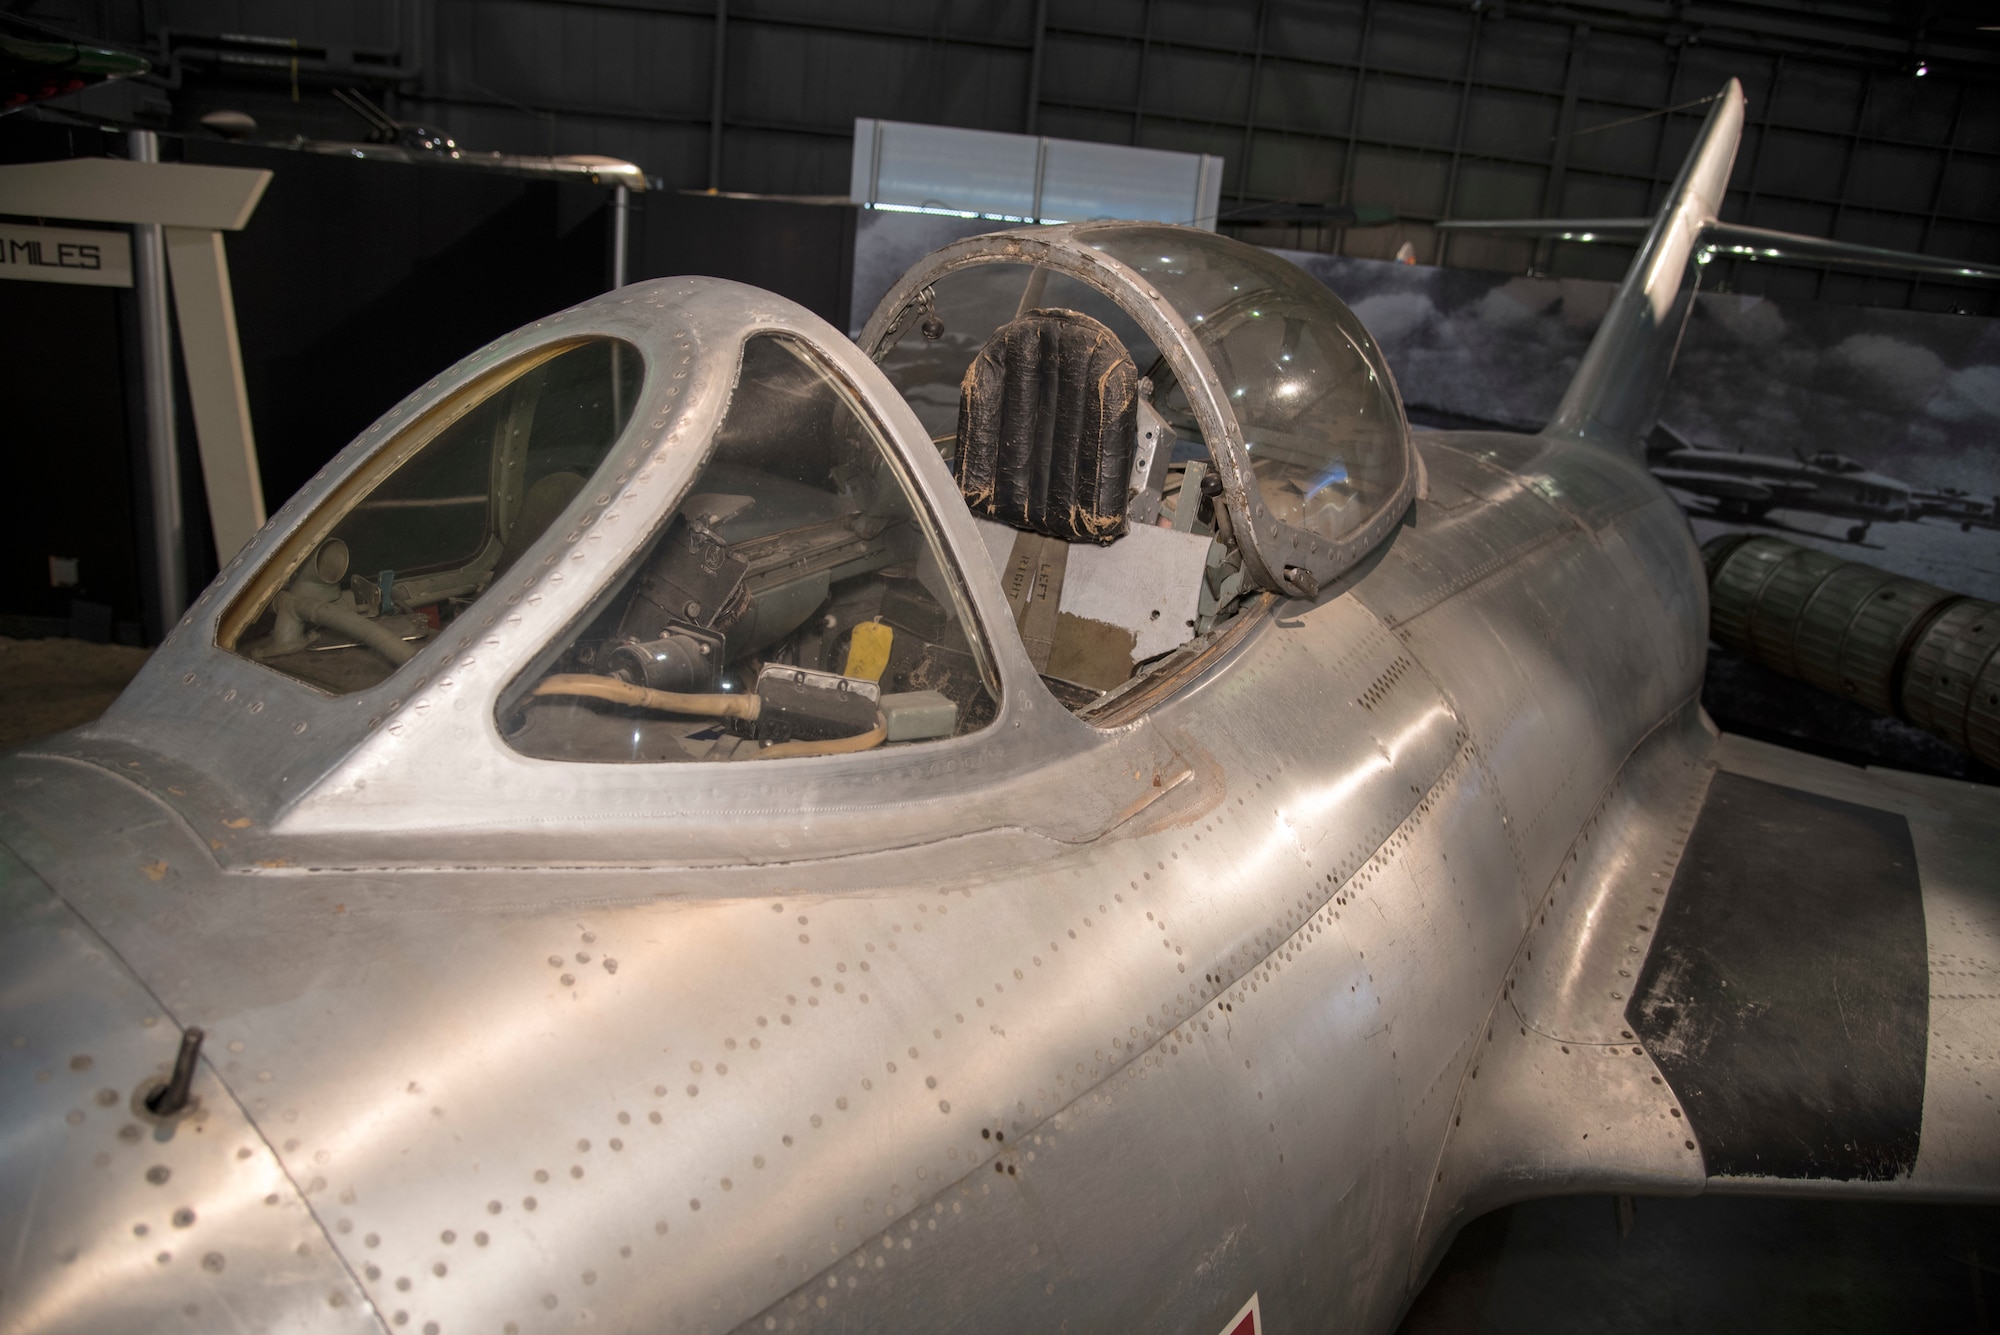 DAYTON, Ohio -- Mikoyan-Gurevich MiG-15 on display in the Korean War Gallery at the National Museum of the United States Air Force. (U.S. Air Force photo by Ken LaRock)